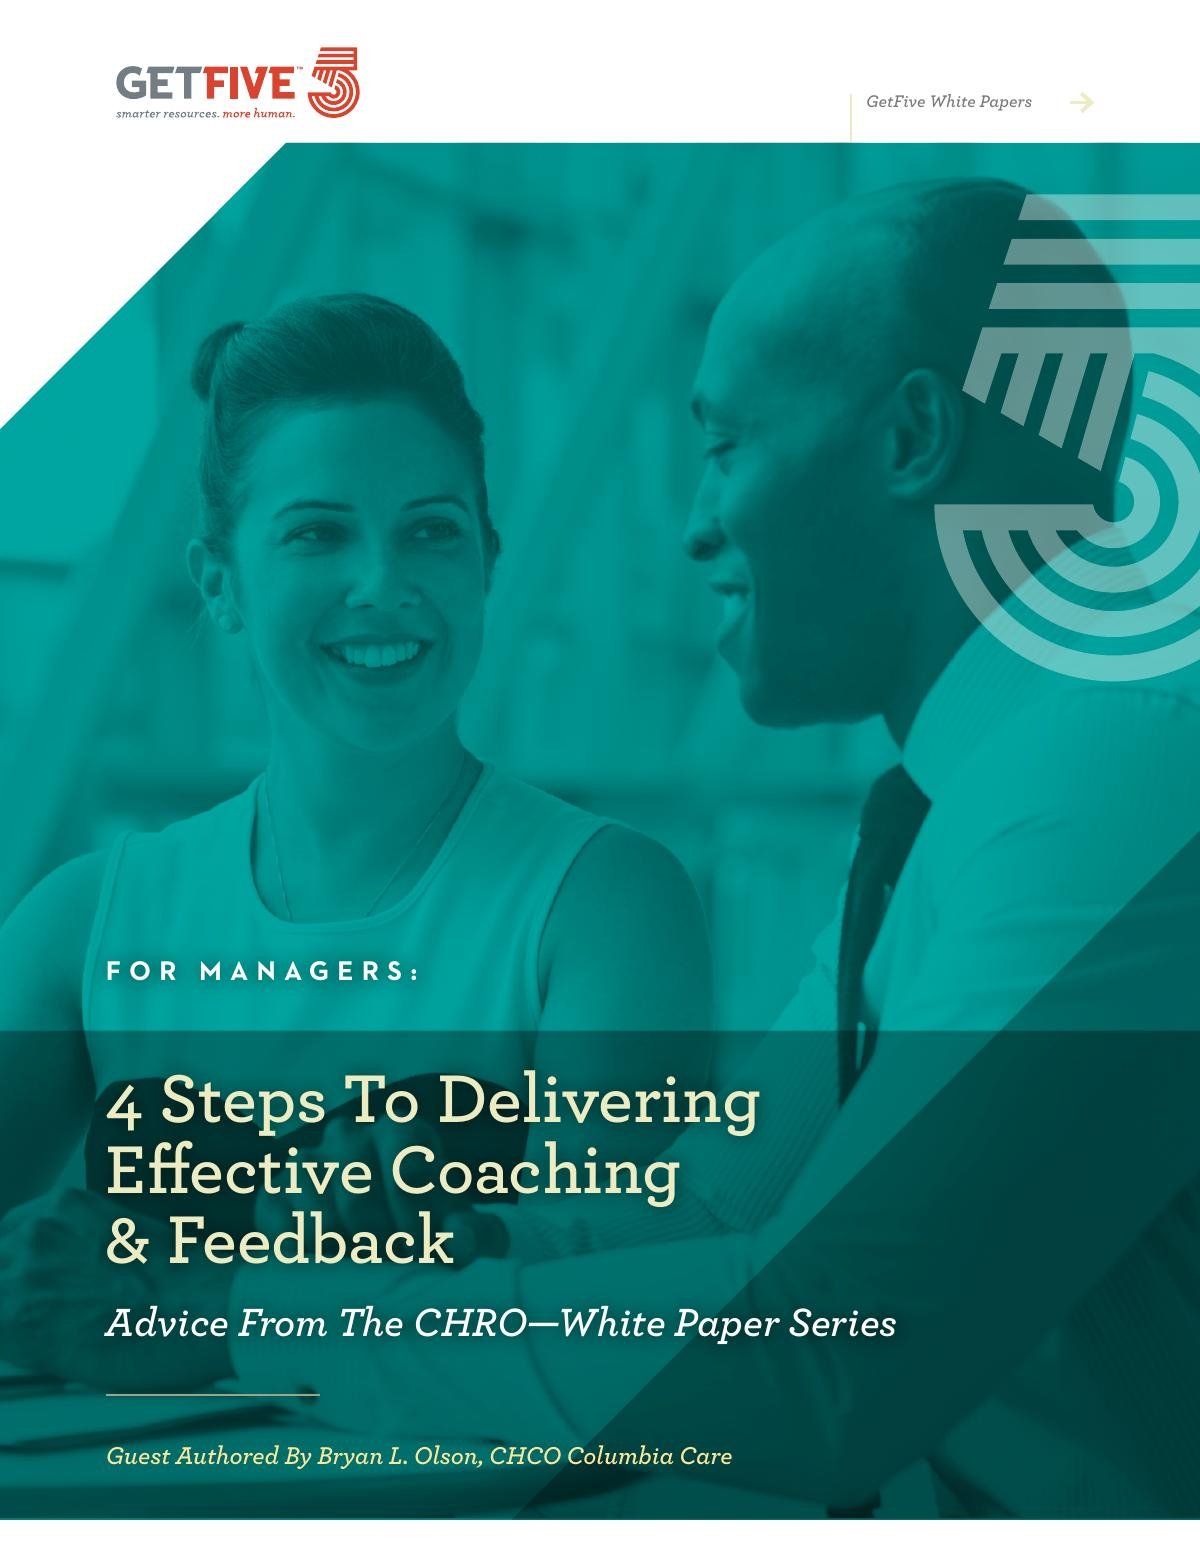 4 Steps To Delivering Effective Coaching & Feedback - GetFive Whitepaper